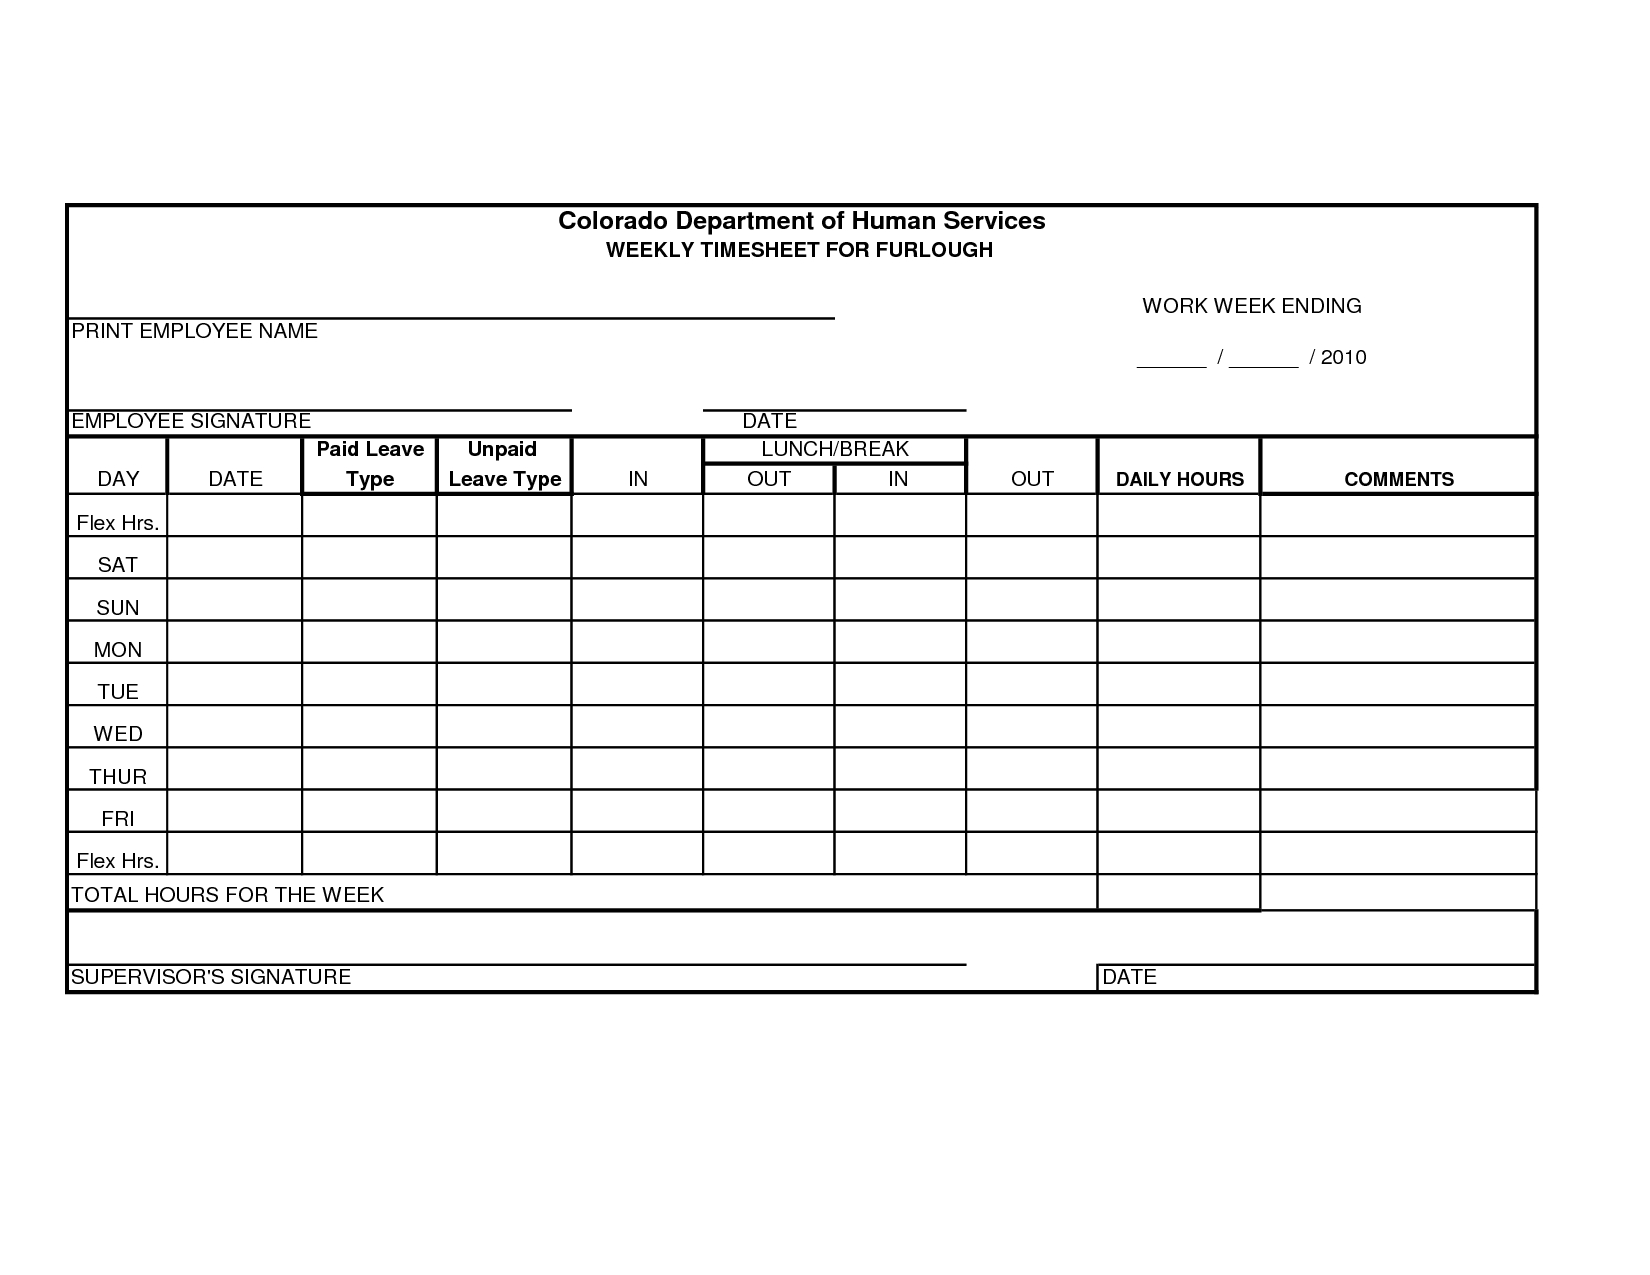 Free Printable Time Sheets Forms | Furlough Weekly Time Sheet - Free Printable Weekly Time Sheets